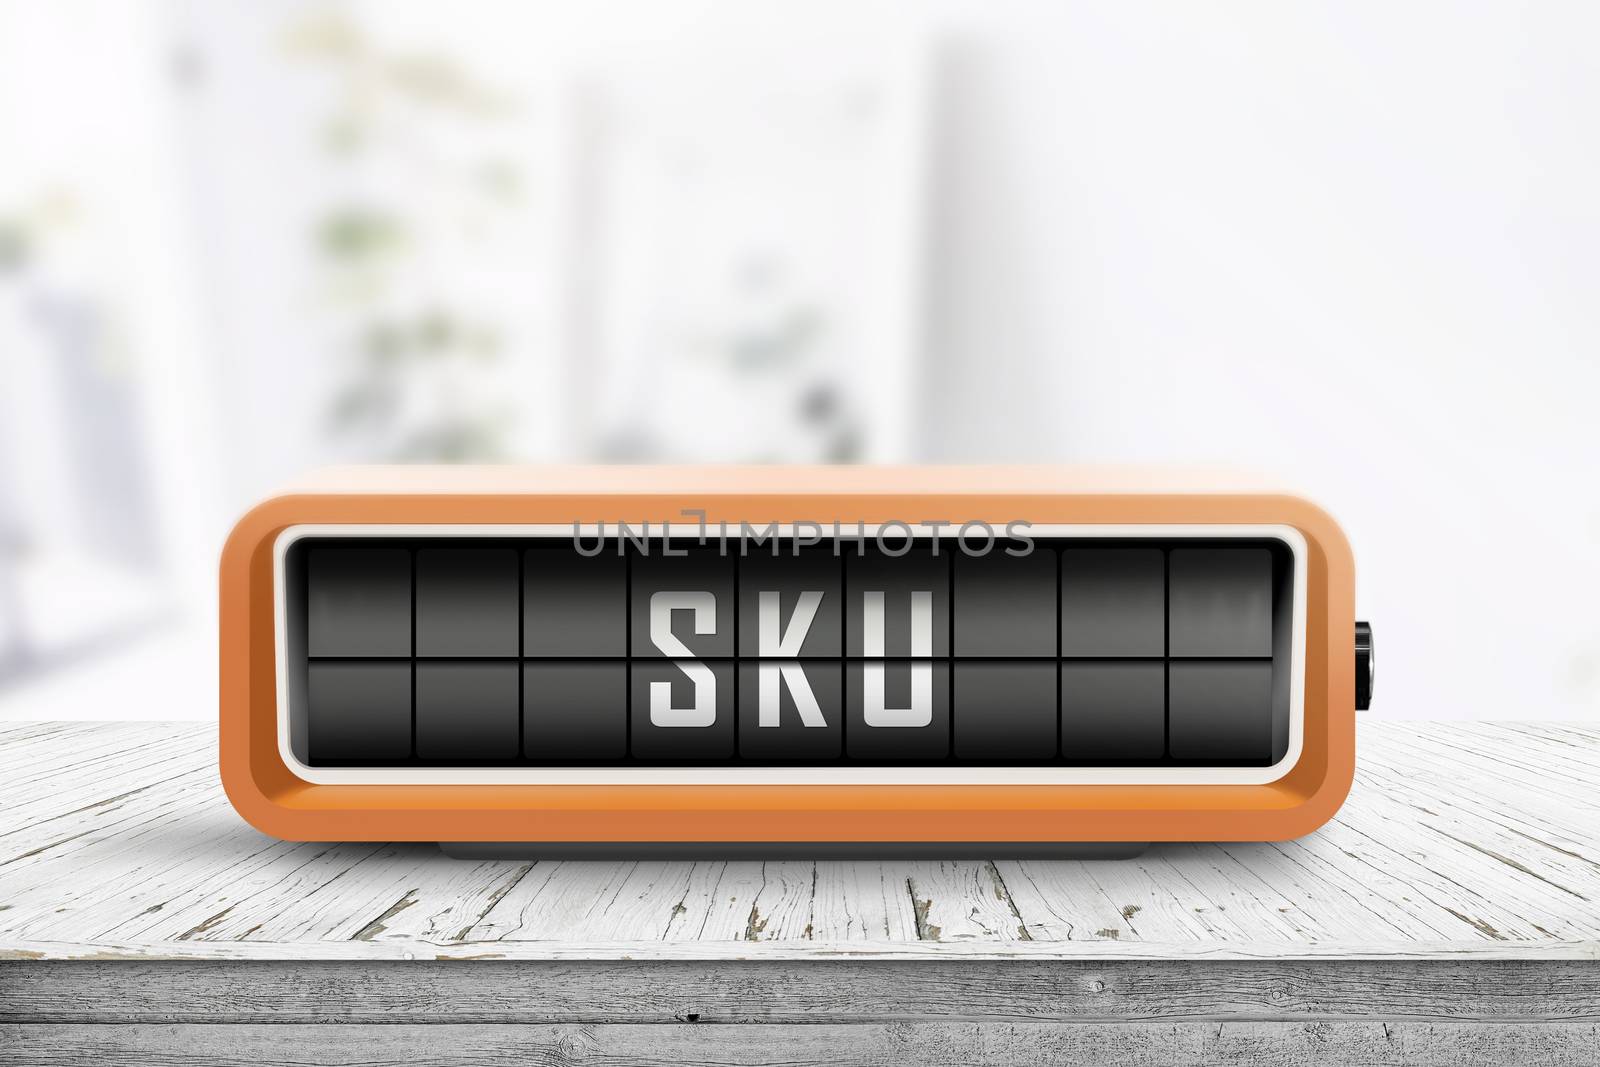 SKU sign and abbreviation for stock keeping unit by Sportactive